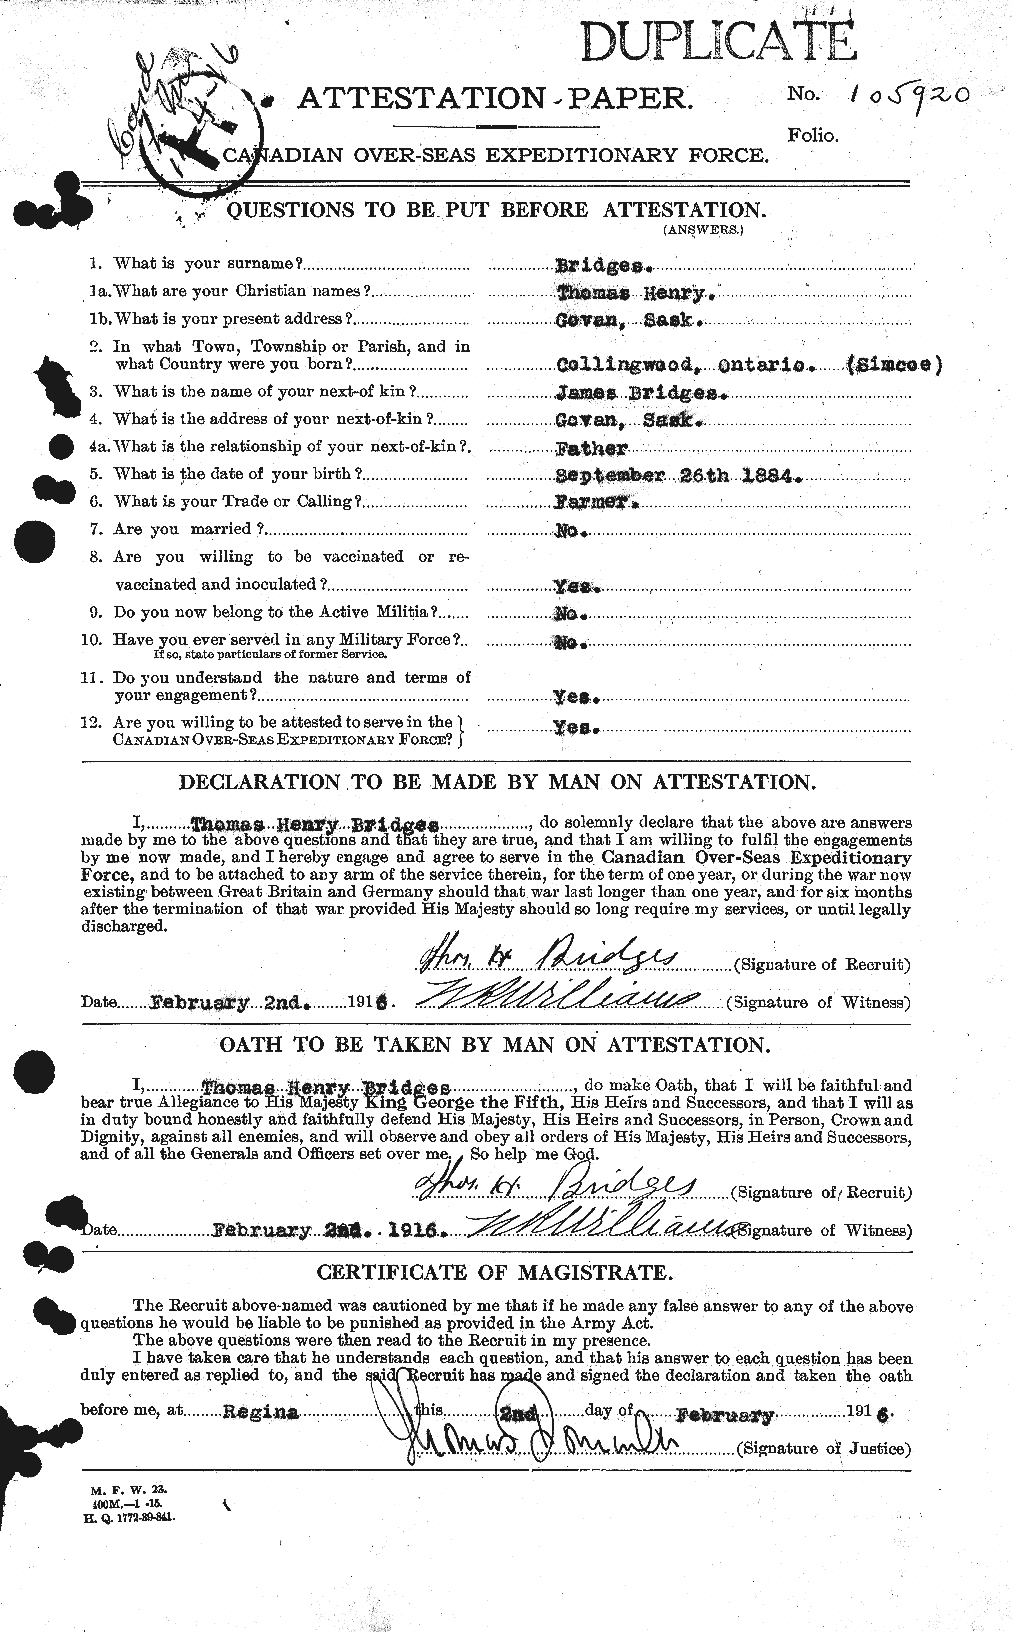 Personnel Records of the First World War - CEF 259839a